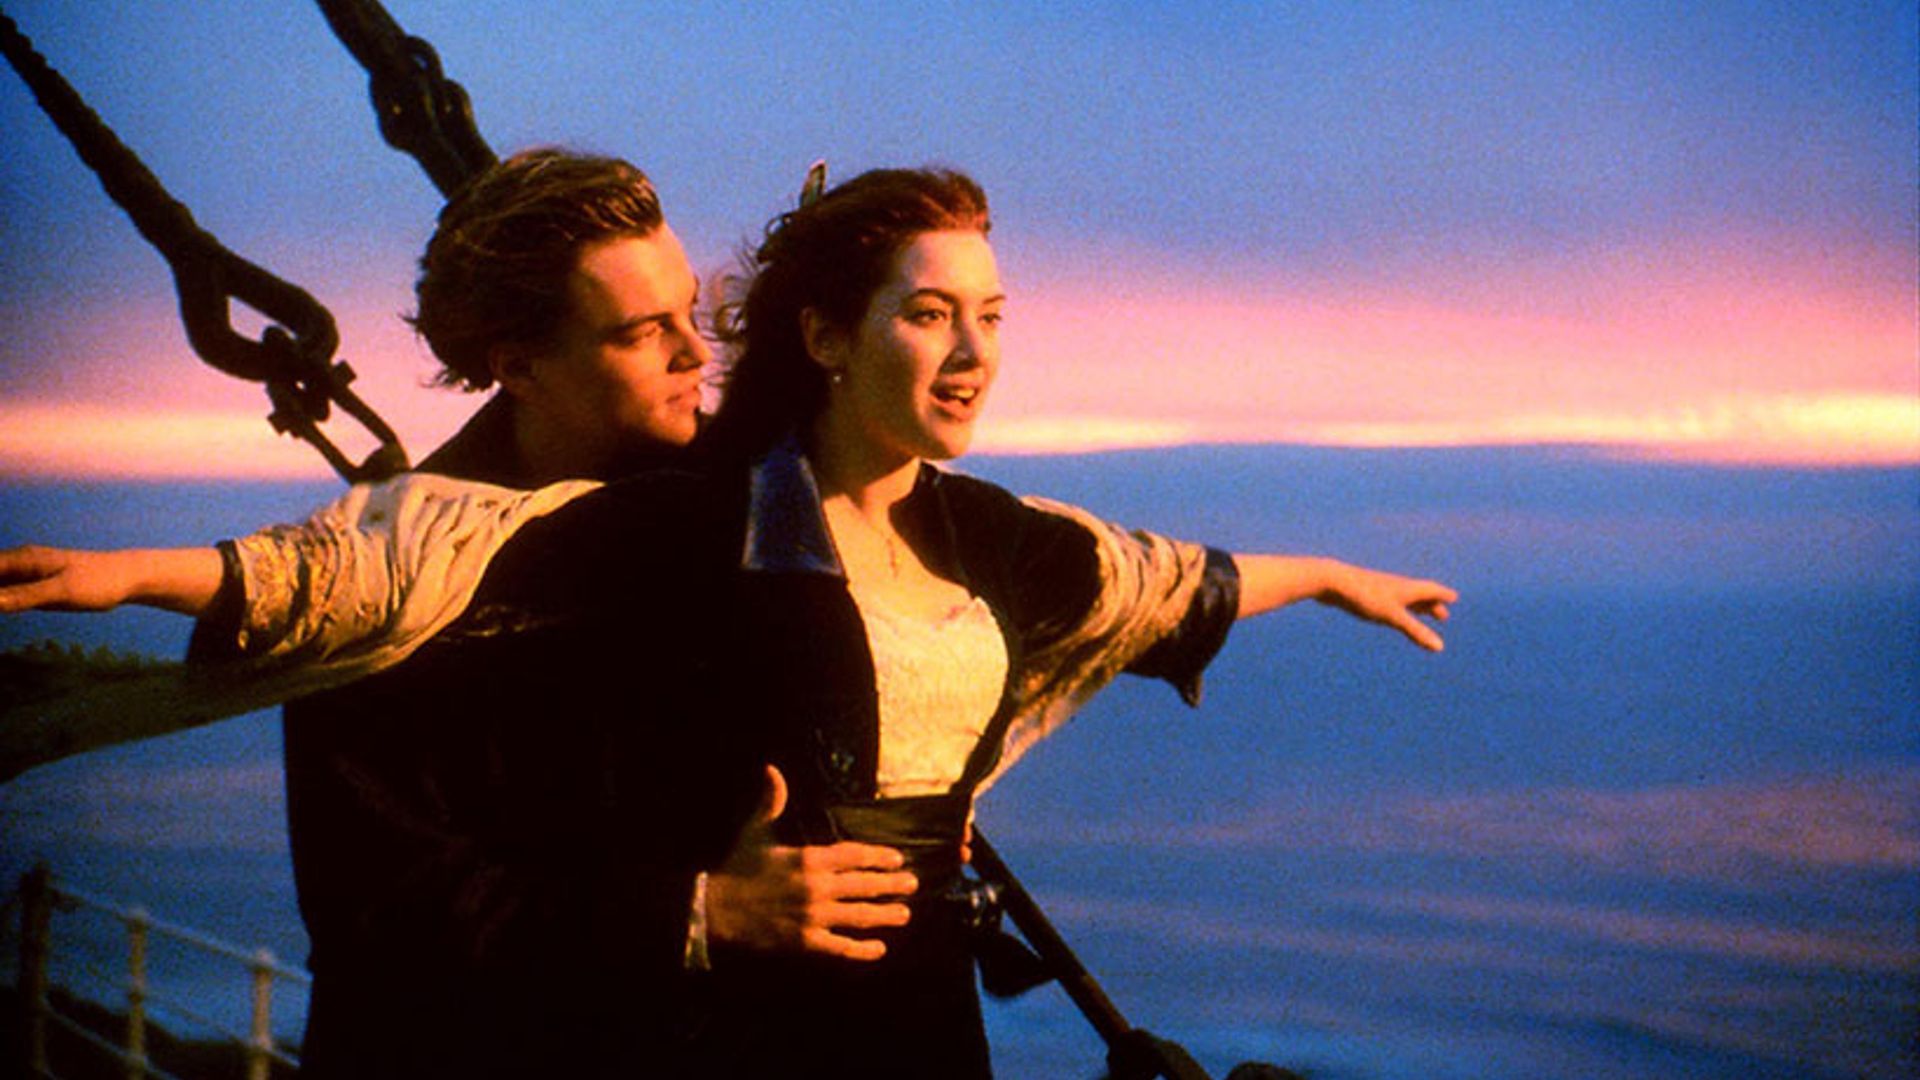 Titanic stars Leonardo DiCaprio, Kate Winslet and Billy Zane reunite 20 years after filming Hollywood epic